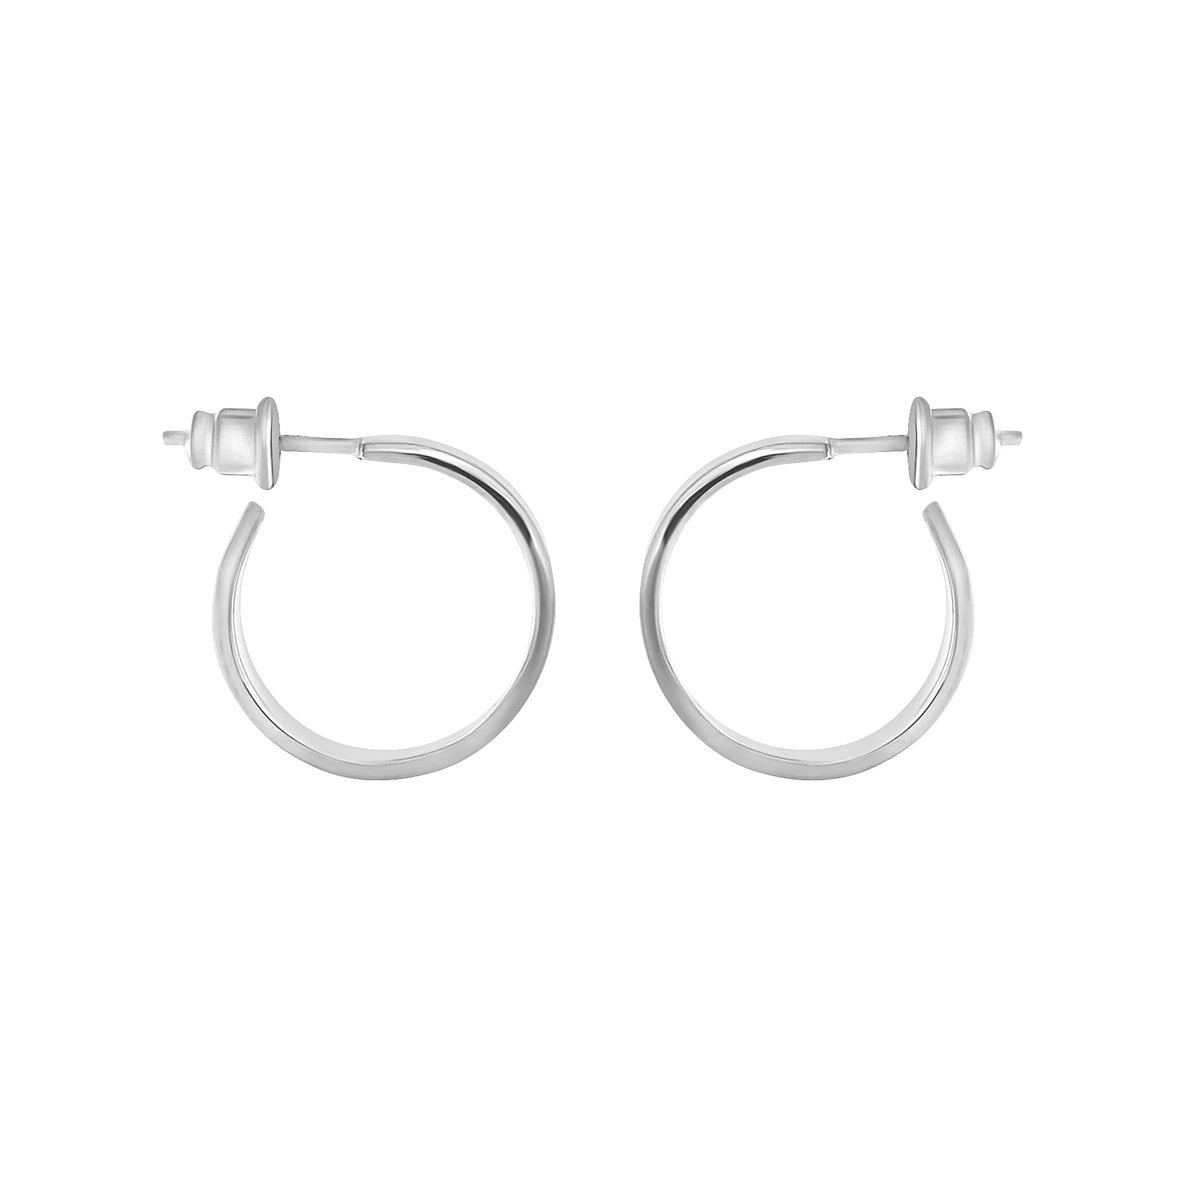 VIKA jewels self love collection earrings Ohrringe hoops Statement jewel silver recycled sterling handmade bali sustainable ethical nachhaltig schmuck